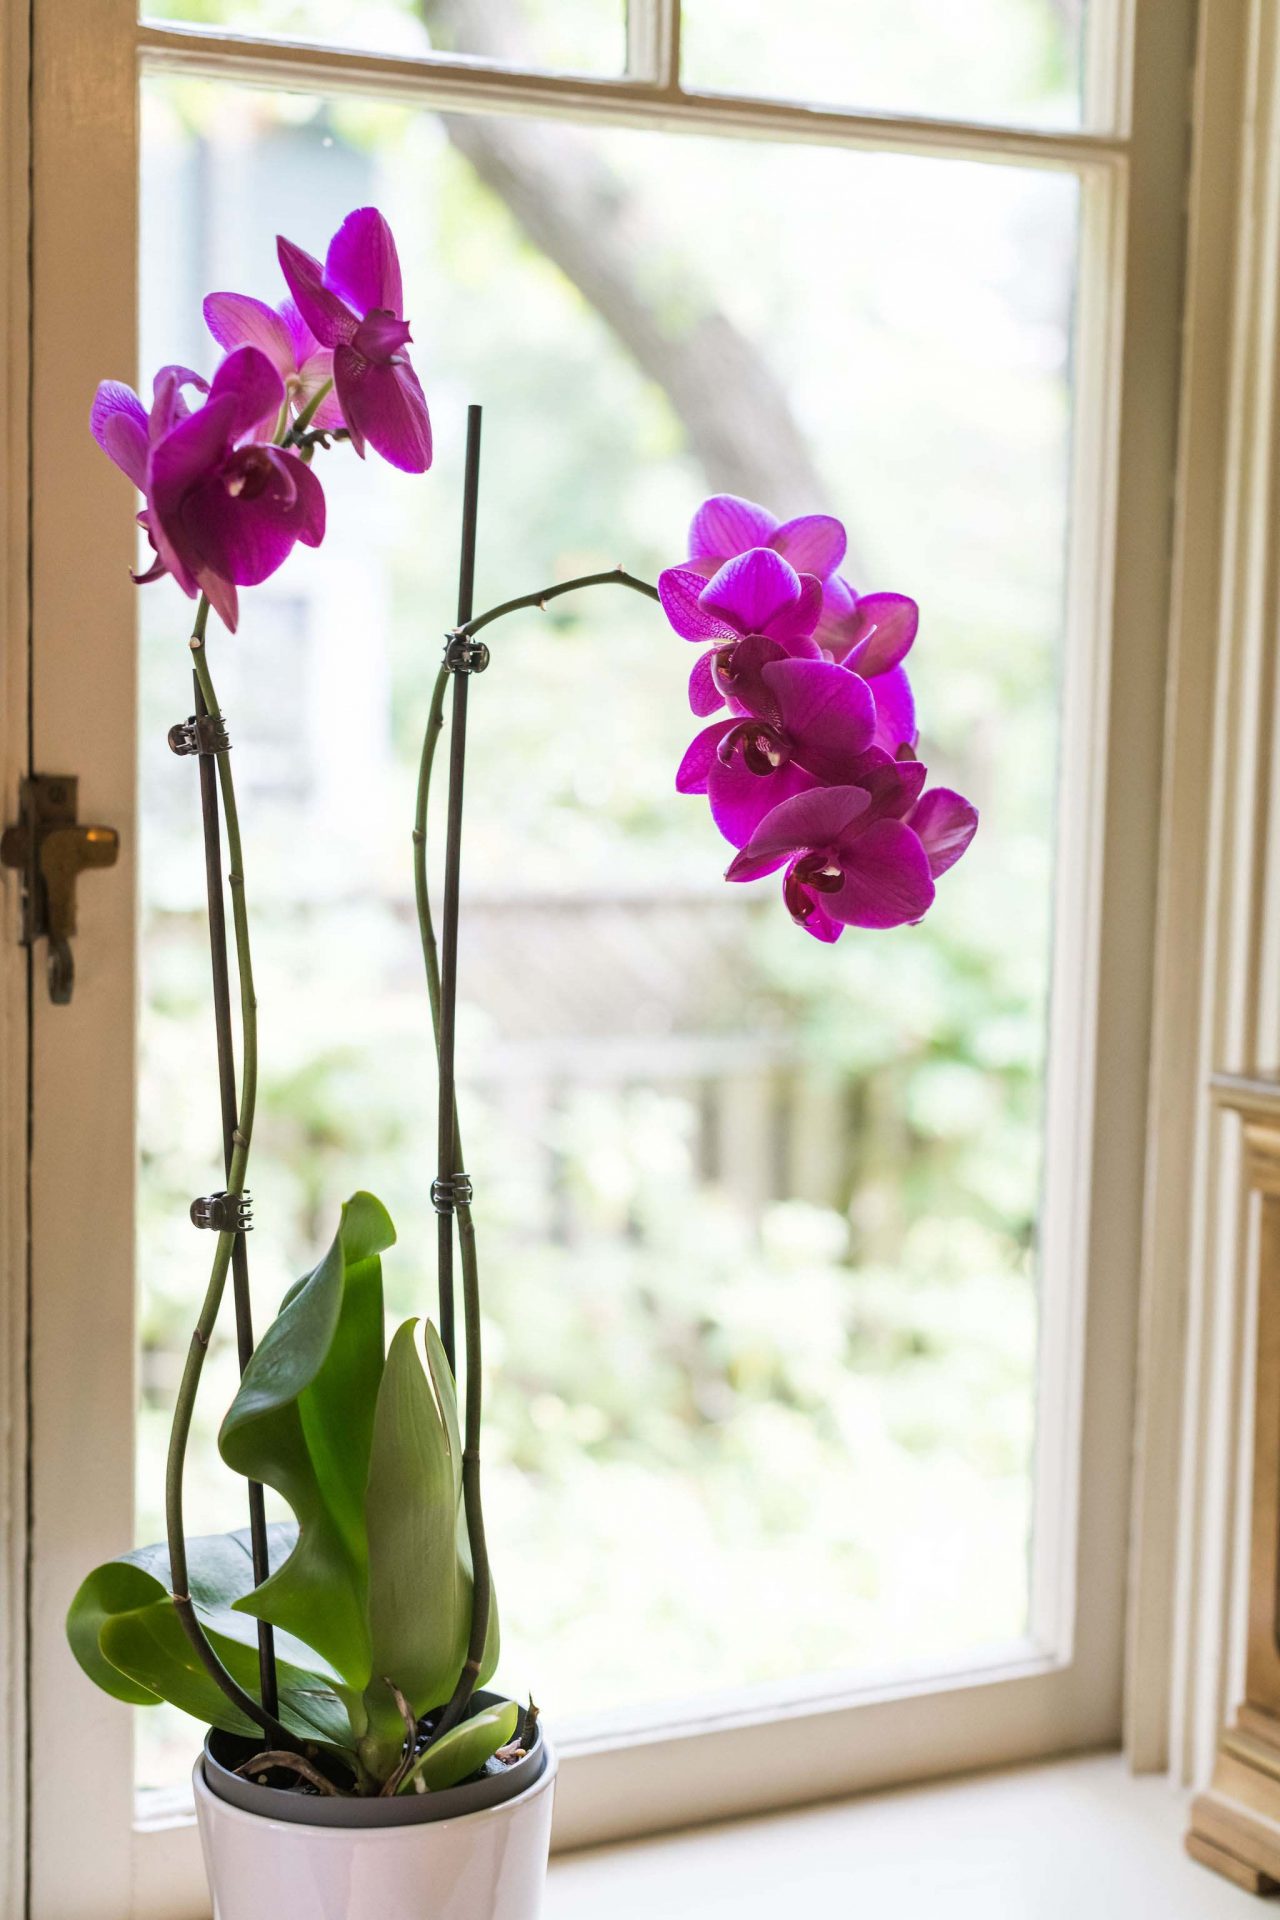 A close-up of purple orchids on the window sill of the sun room.